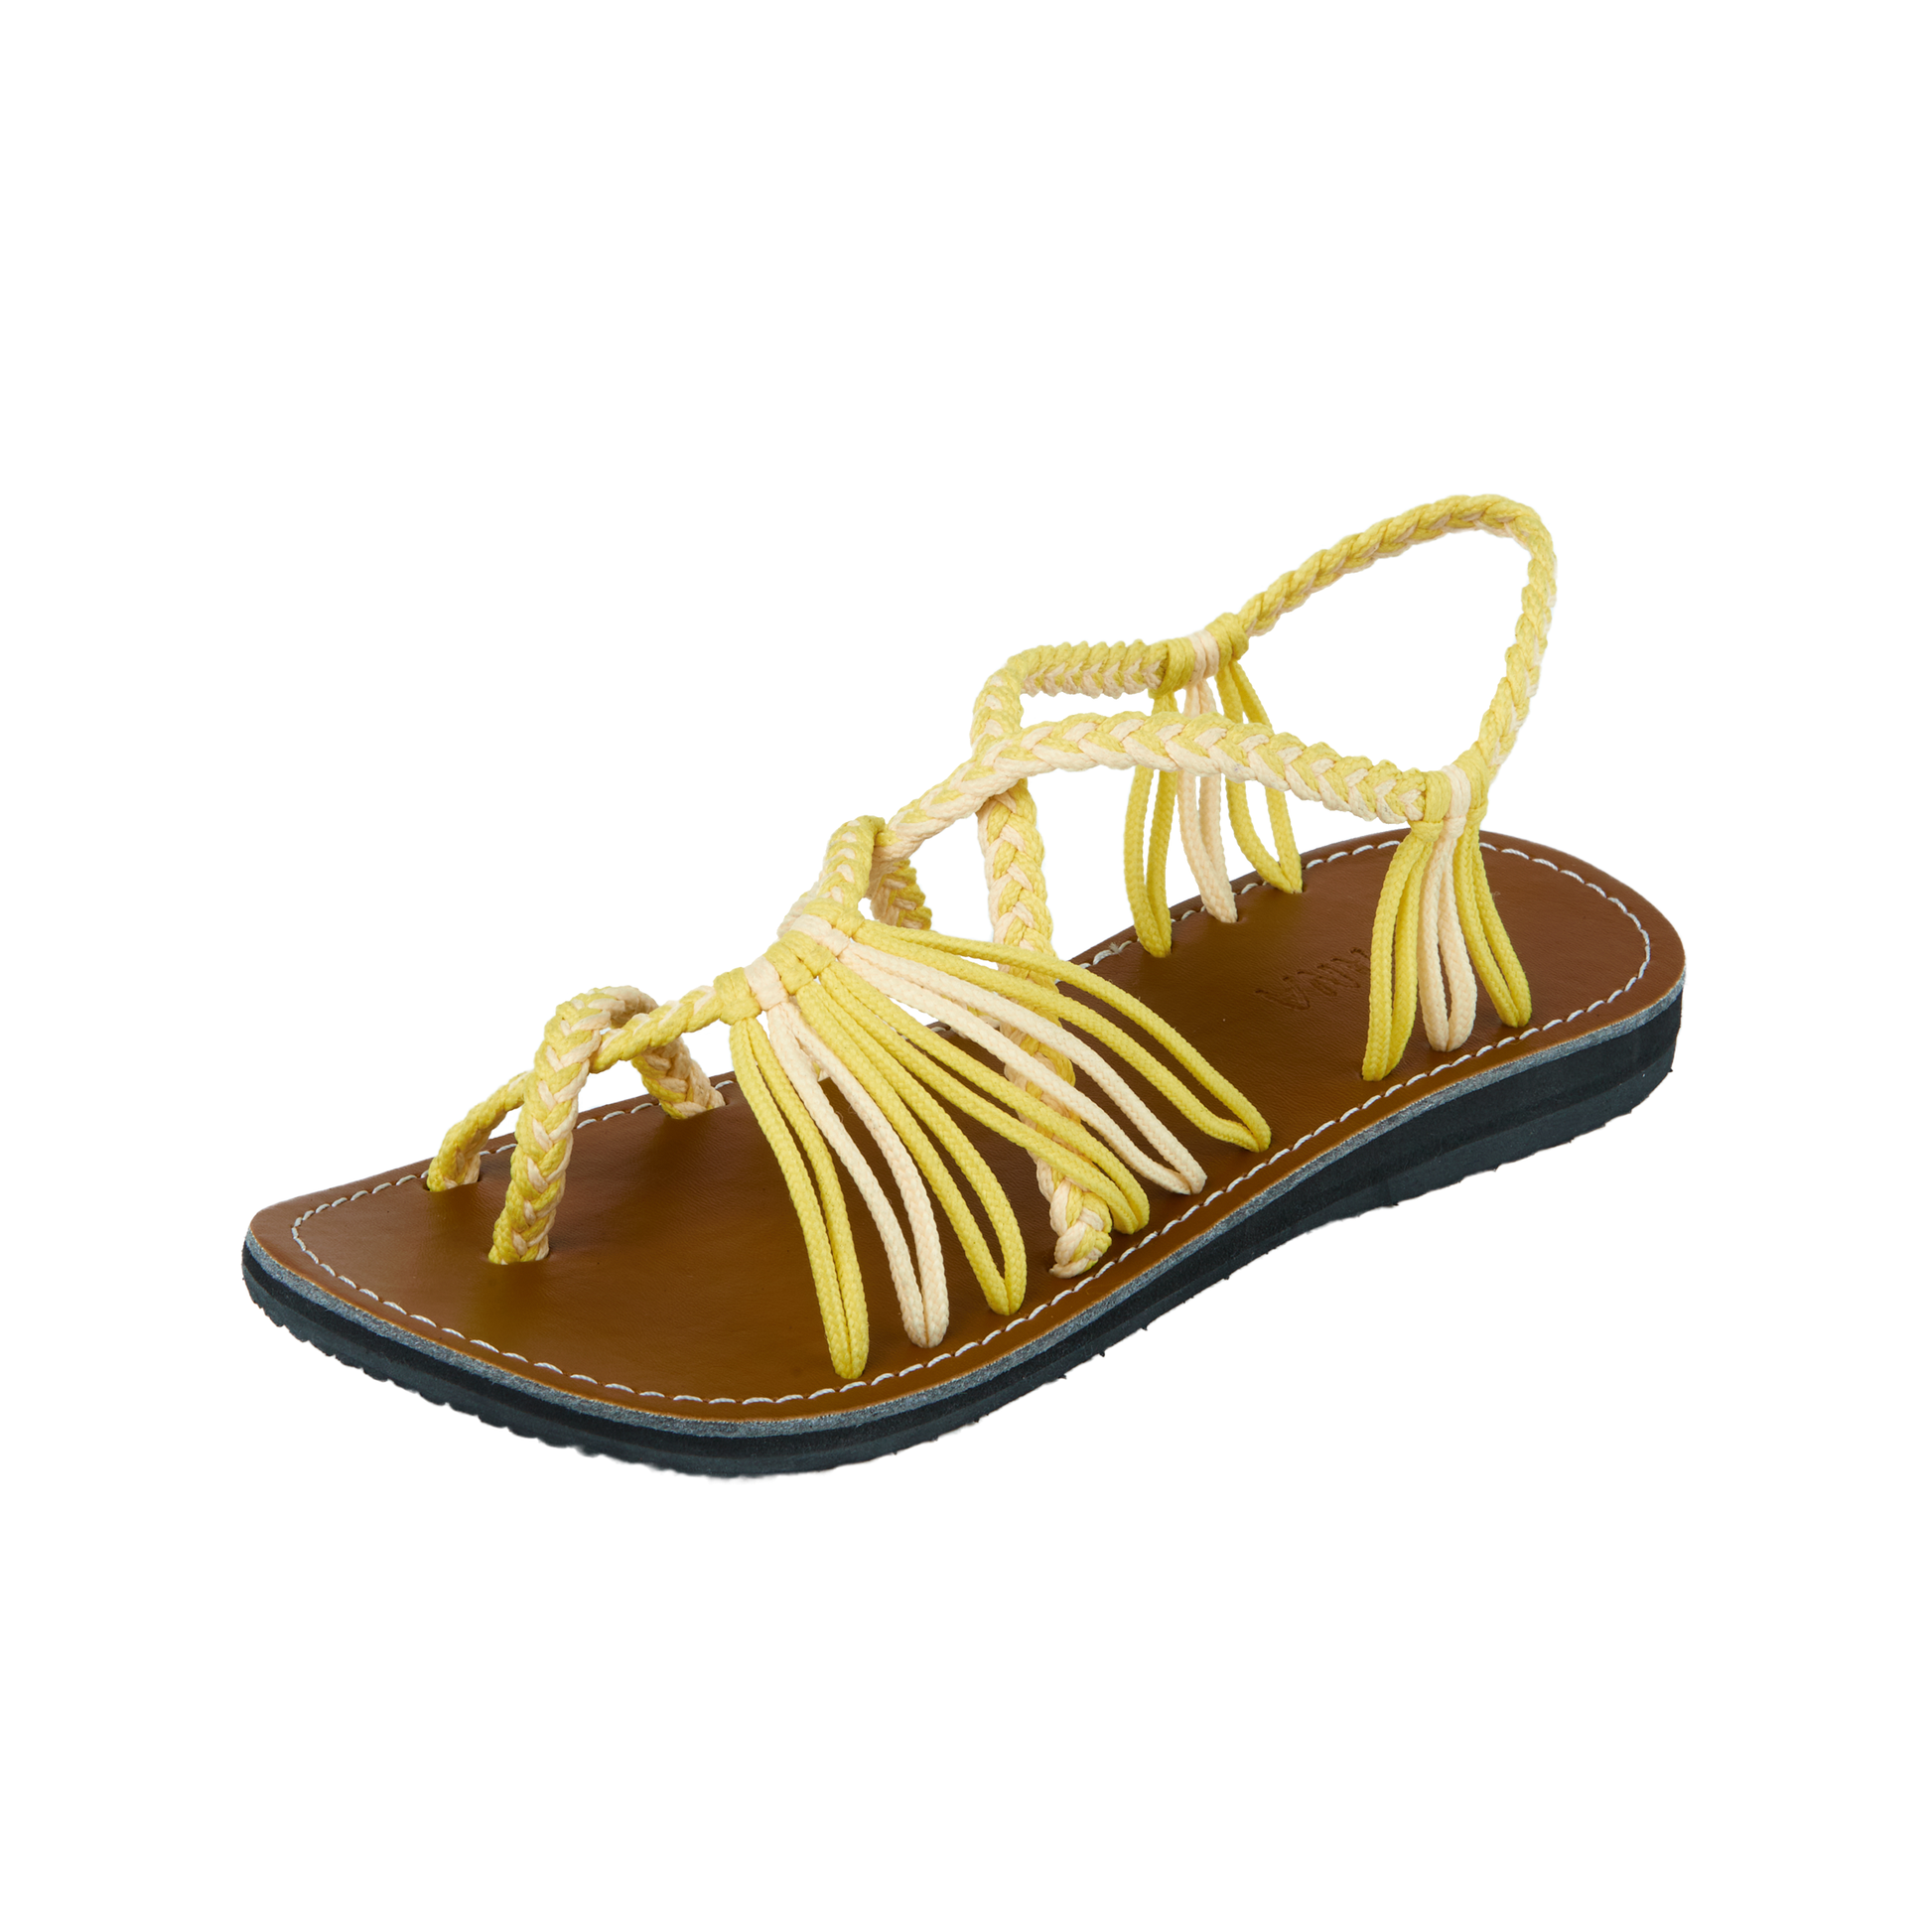 Hand woven sandals Yellow Cream Rope Sandals on the side  in white background